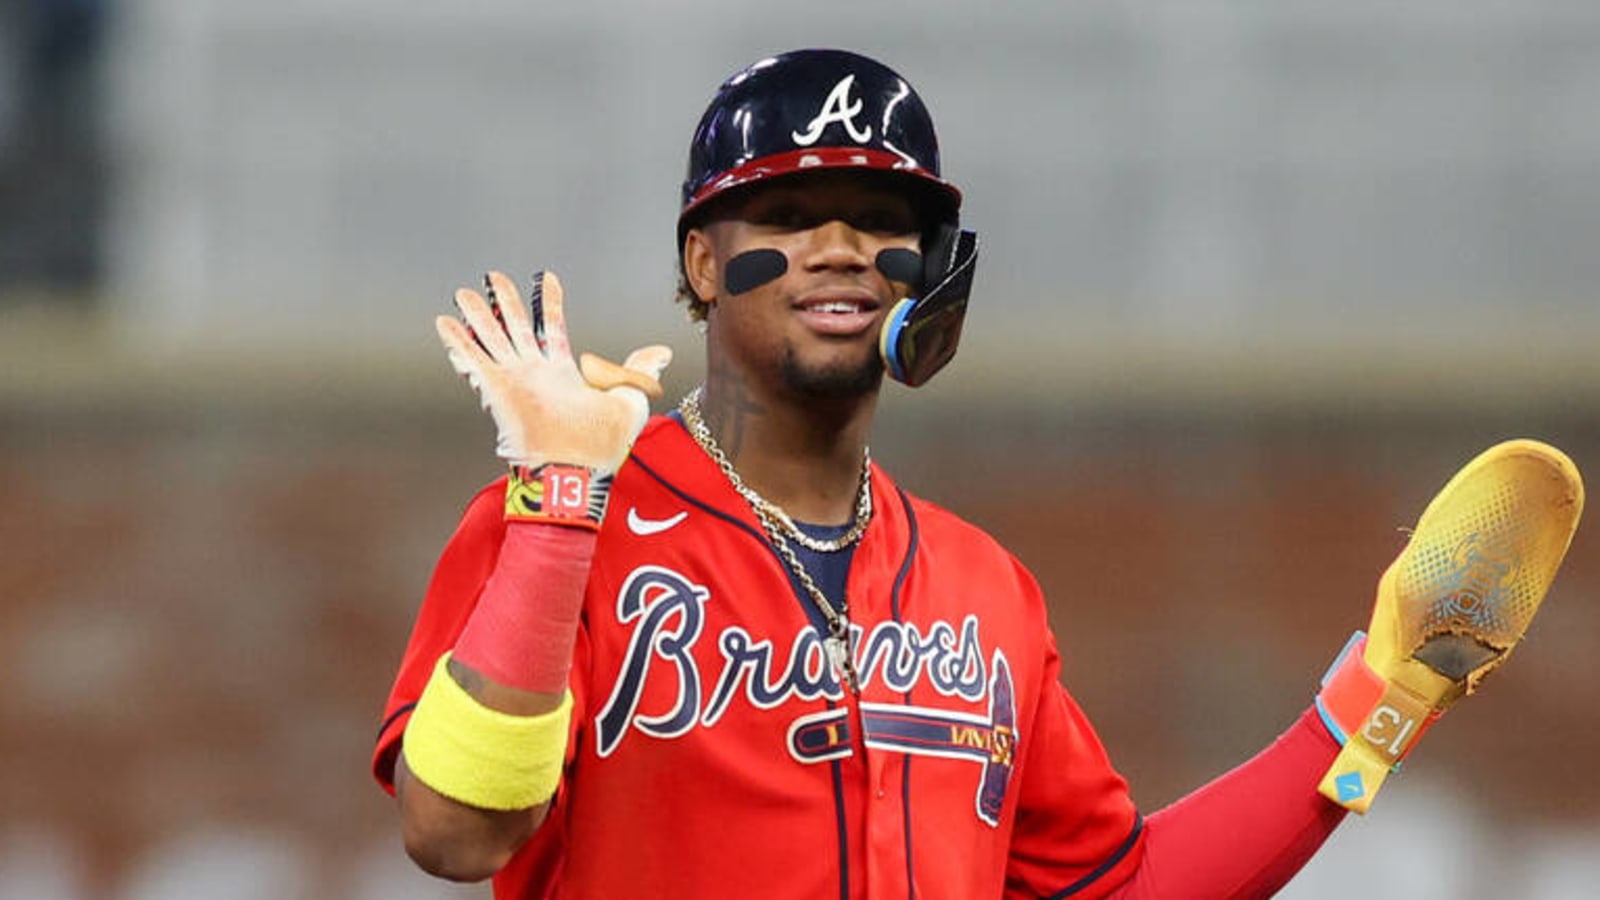 Braves' Acuna Jr. shows off his cannon arm